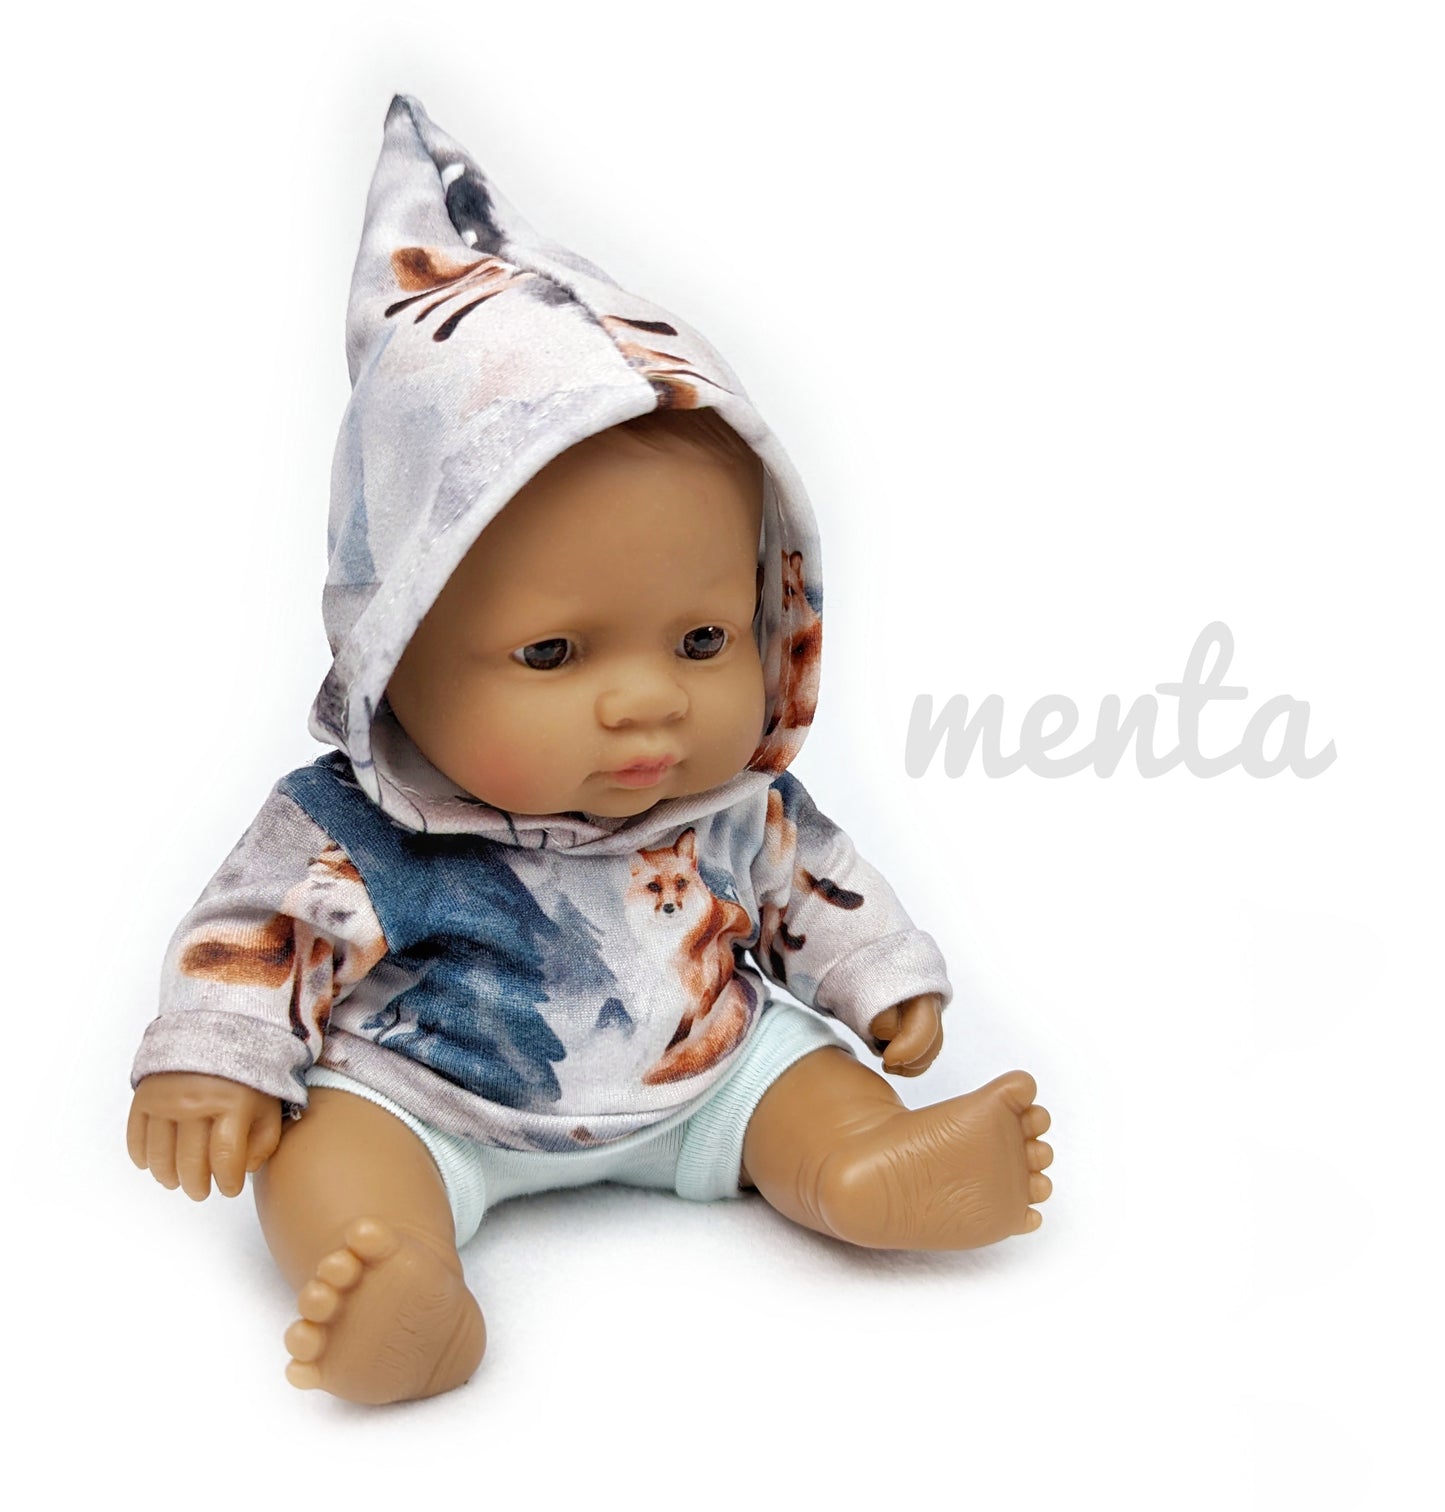 Sweater and Hoodies 8" Doll